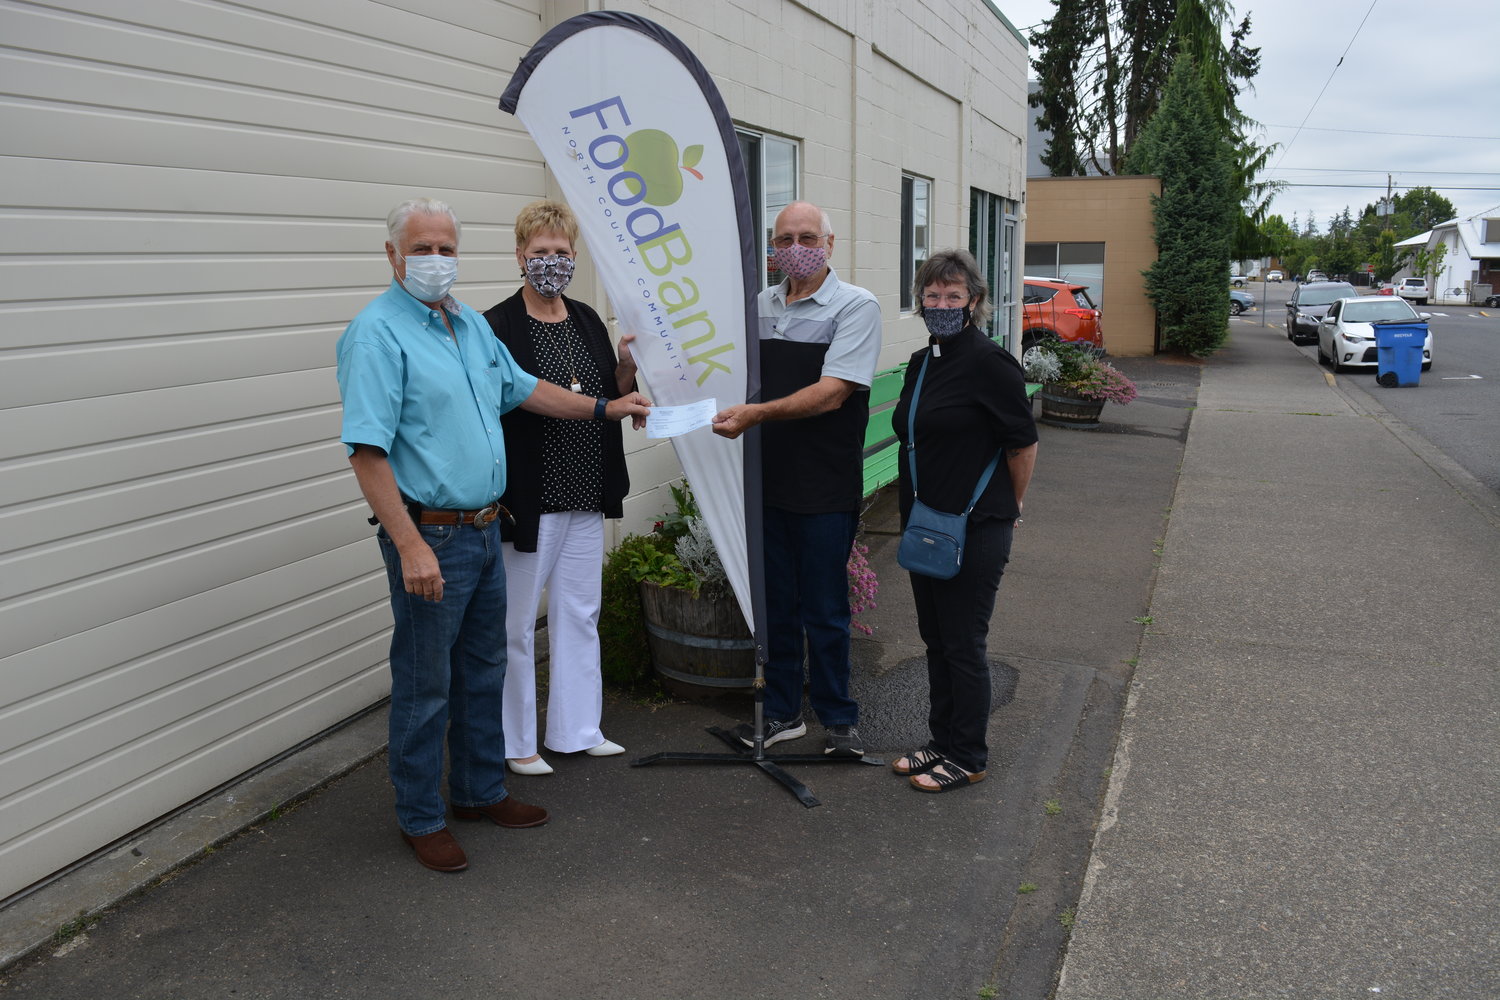 North County Community Food Bank Board Members Jerry Kolke and John Idsinga stand with Executive Director Liz Cerveny (second from left) and United Methodist Member Susan Boegli (right).